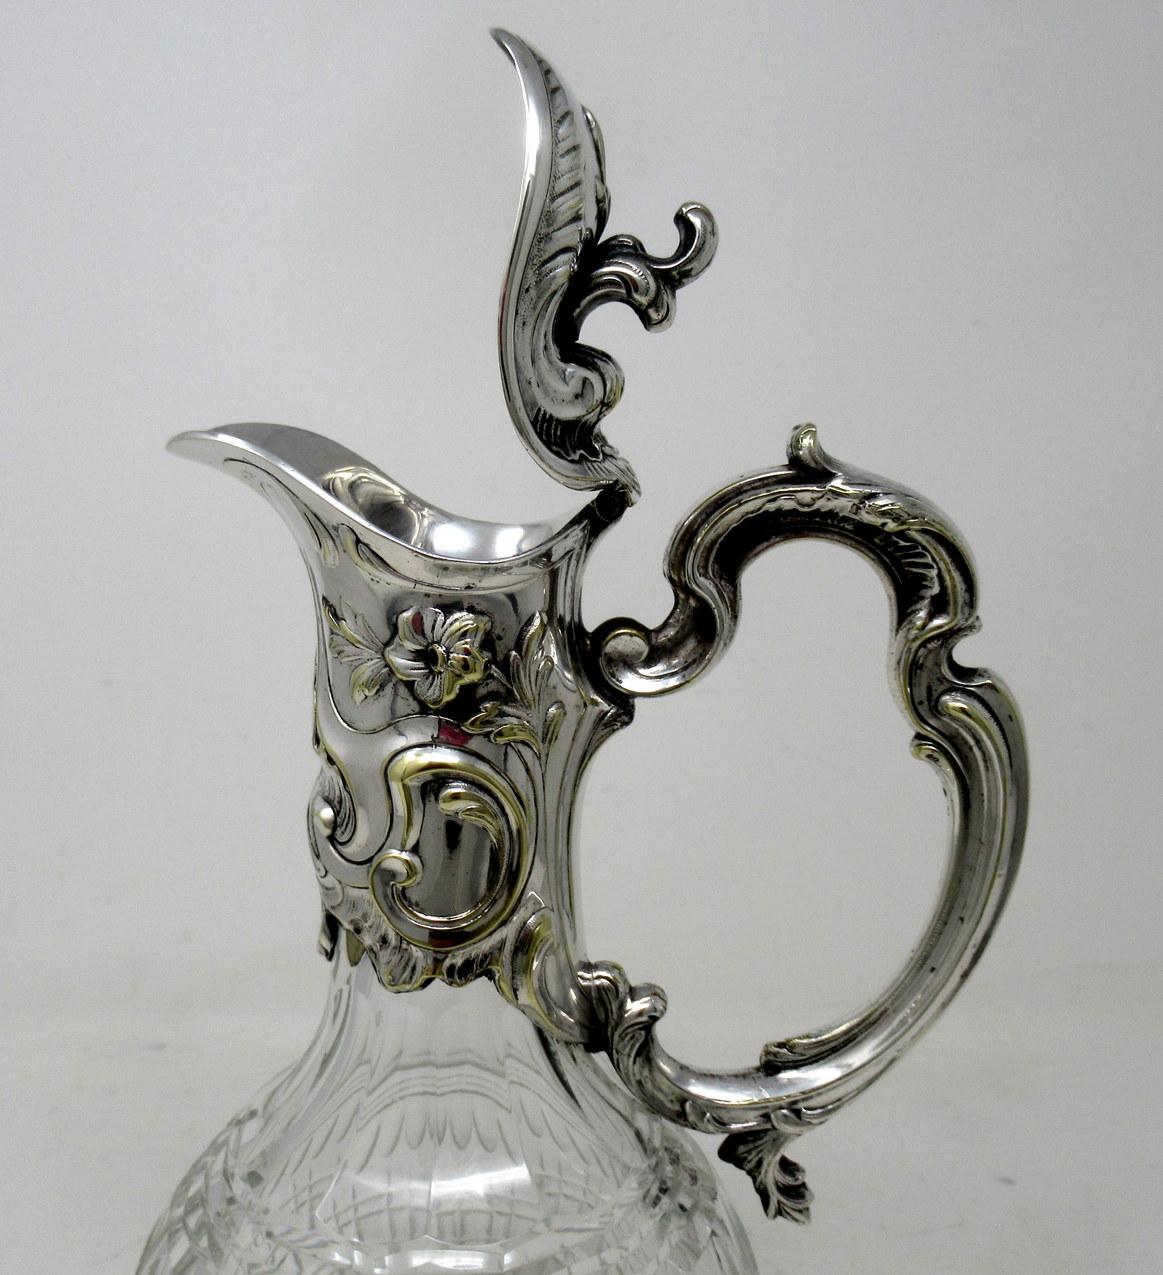 Antique Victorian English Cut Crystal Silver Plated Wine Ewer Claret Jug Pitcher 1